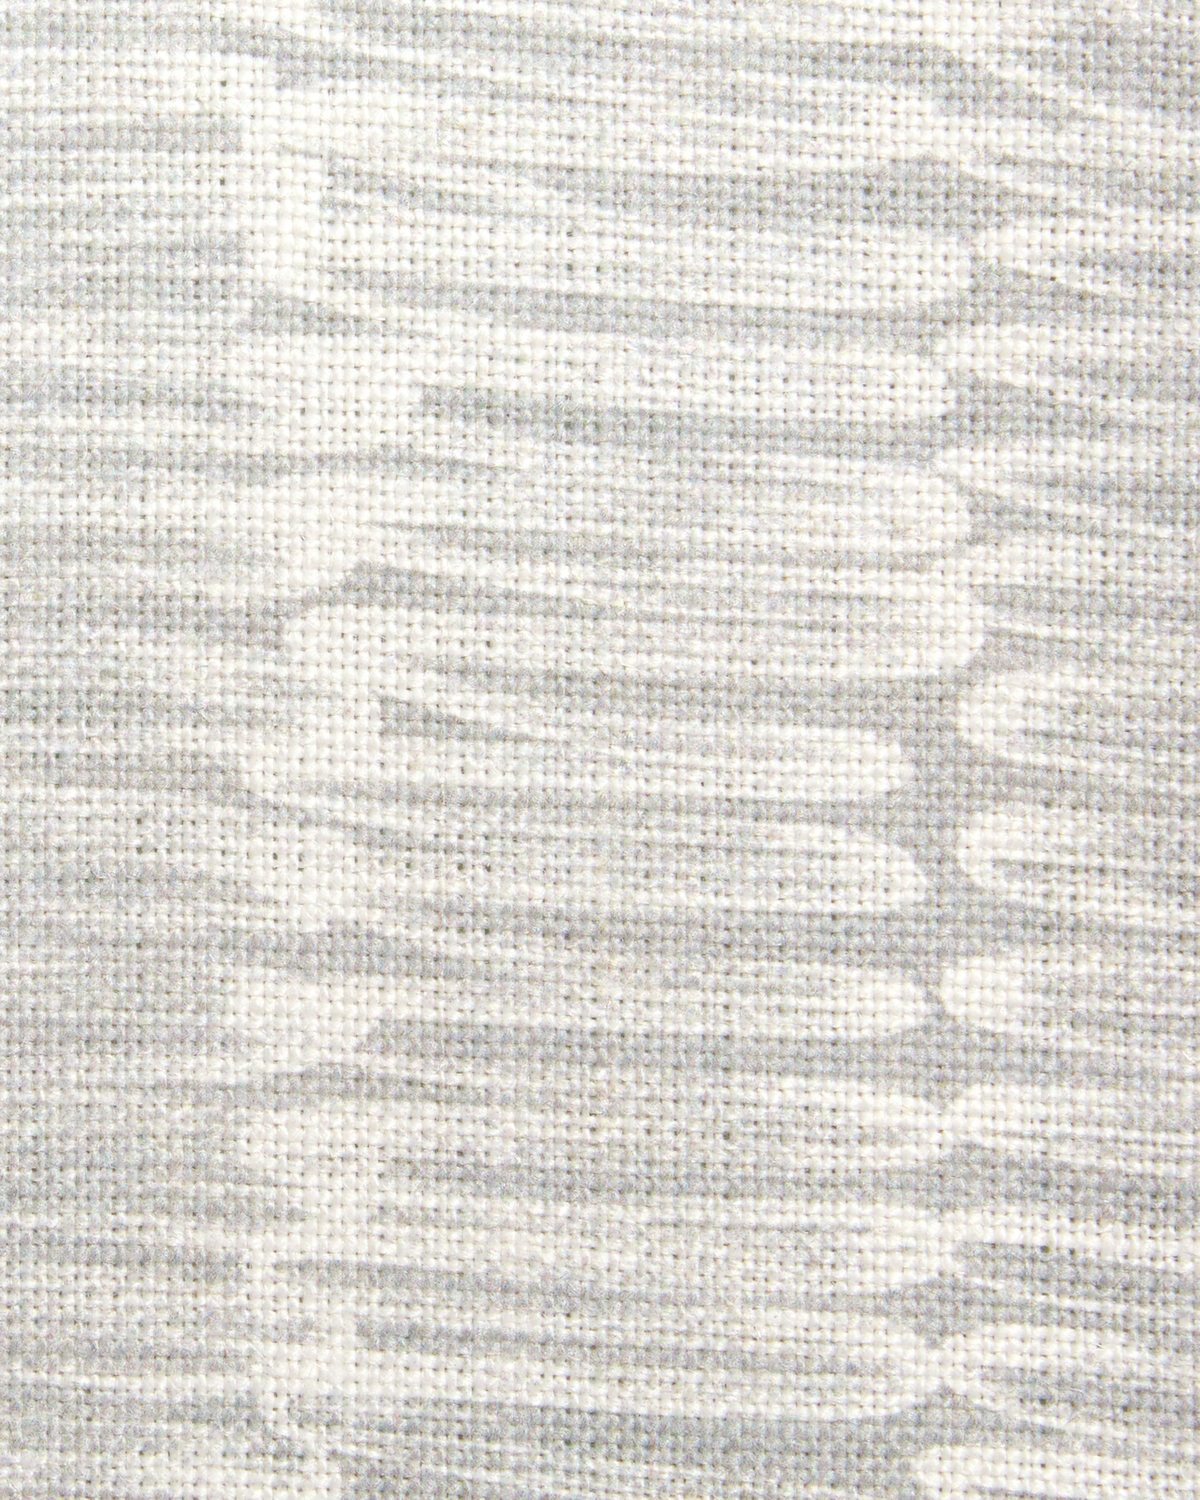 Scribble Fabric in Gray